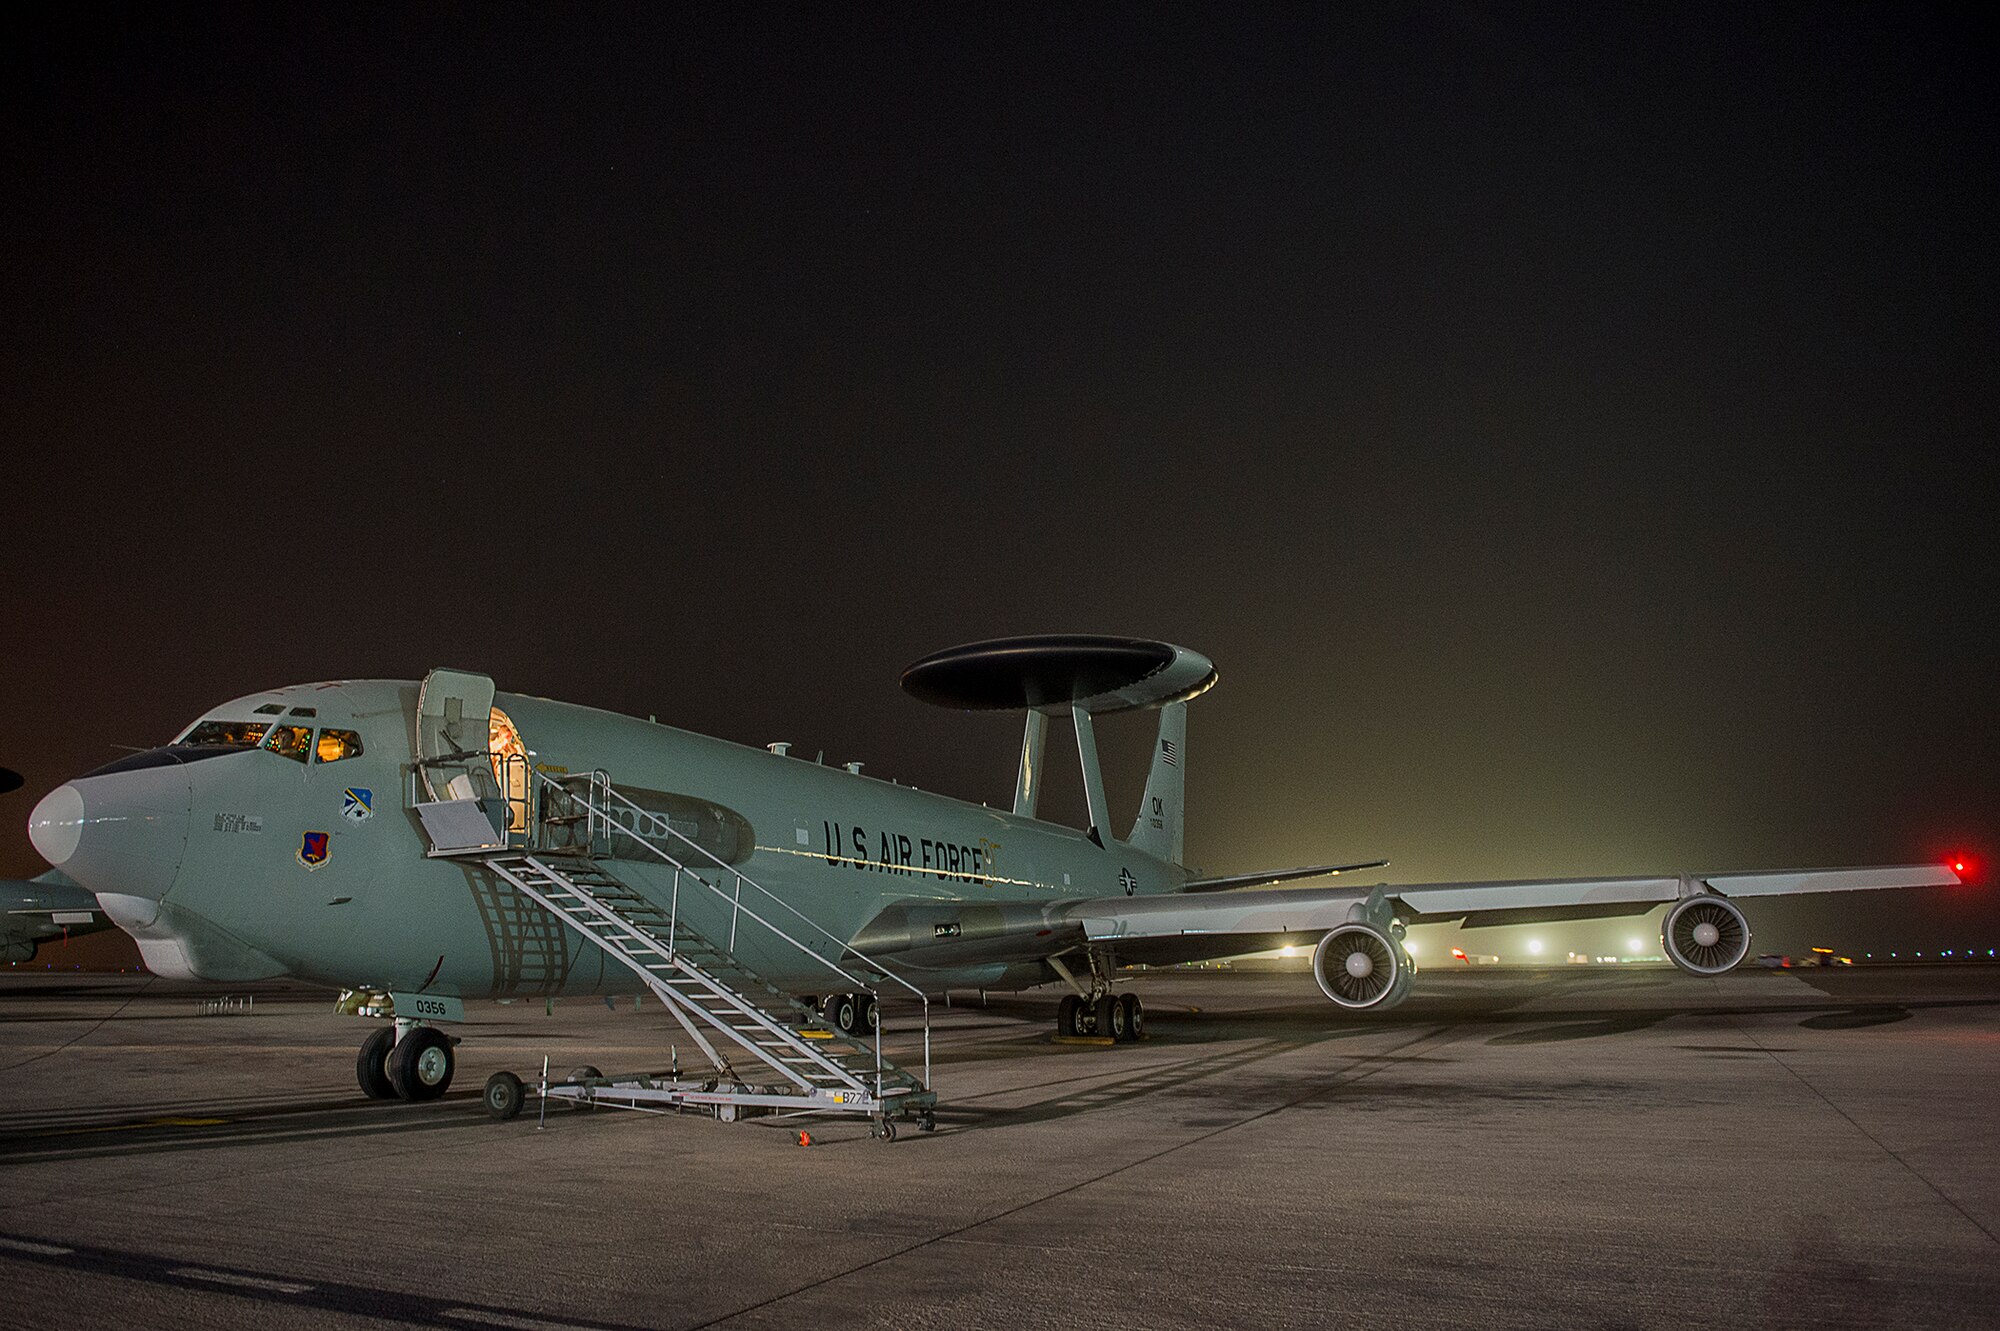 A U.S. Air Force E-3 Sentry, Airborne Warning and Control System, is parked on a flightline in an undisclosed location, Southwest Asia, Jan. 30, 2013. The E-3 Sentry is an aircraft with an integrated command and control battle management, or C2BM, surveillance, target detection, and tracking platform. (U.S. Air Force photo/Tech. Sgt. Dennis J. Henry Jr.)